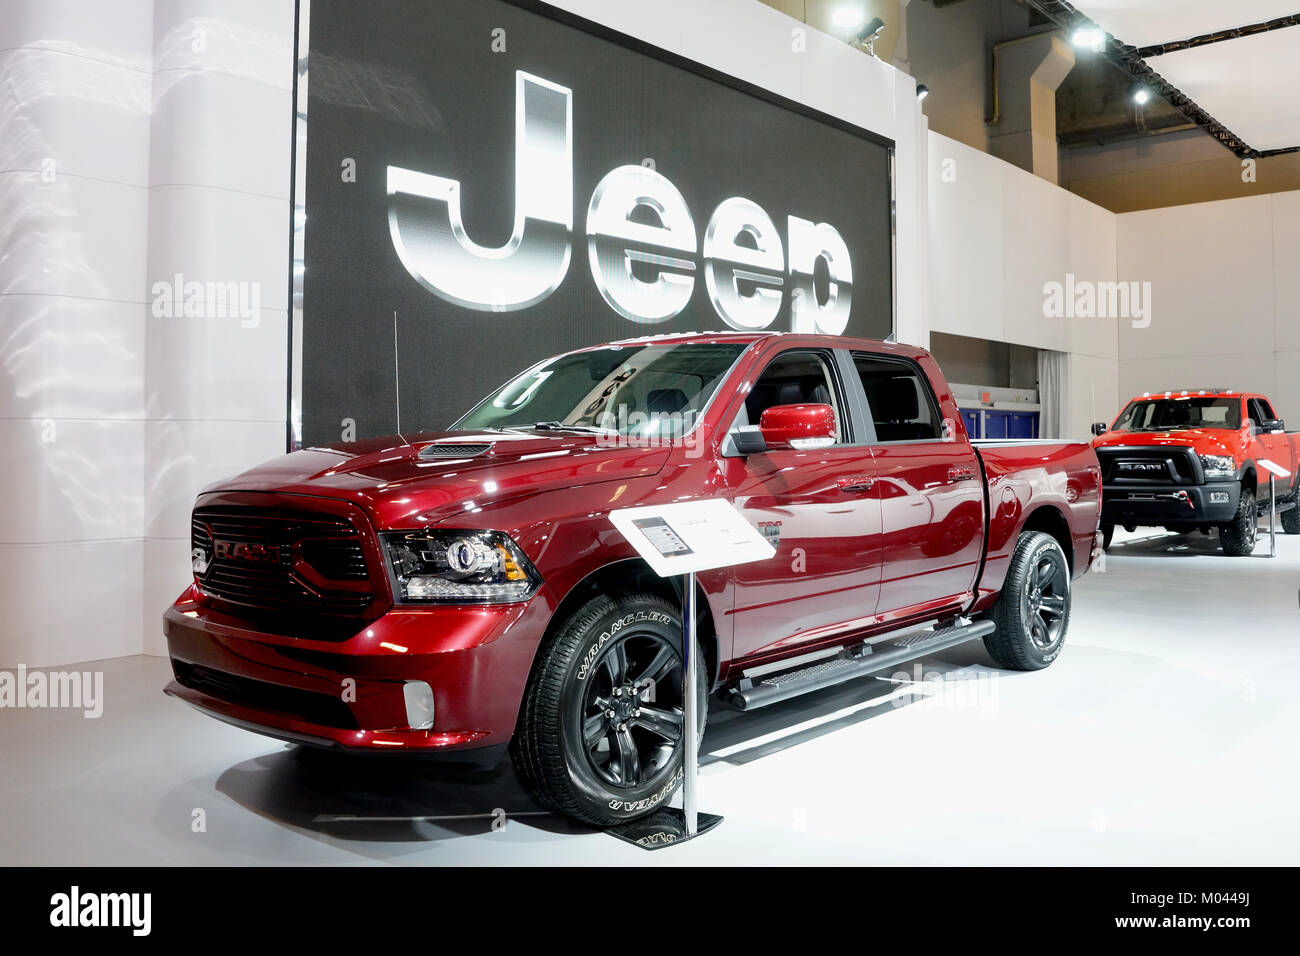 Montreal, Canada. 18th Jan, 2018. Dodge Ram pick-up truck at the Jeep/Dodge display at the Montreal Auto show.Credit:Mario Beauregrad/Alamy Live News Stock Photo